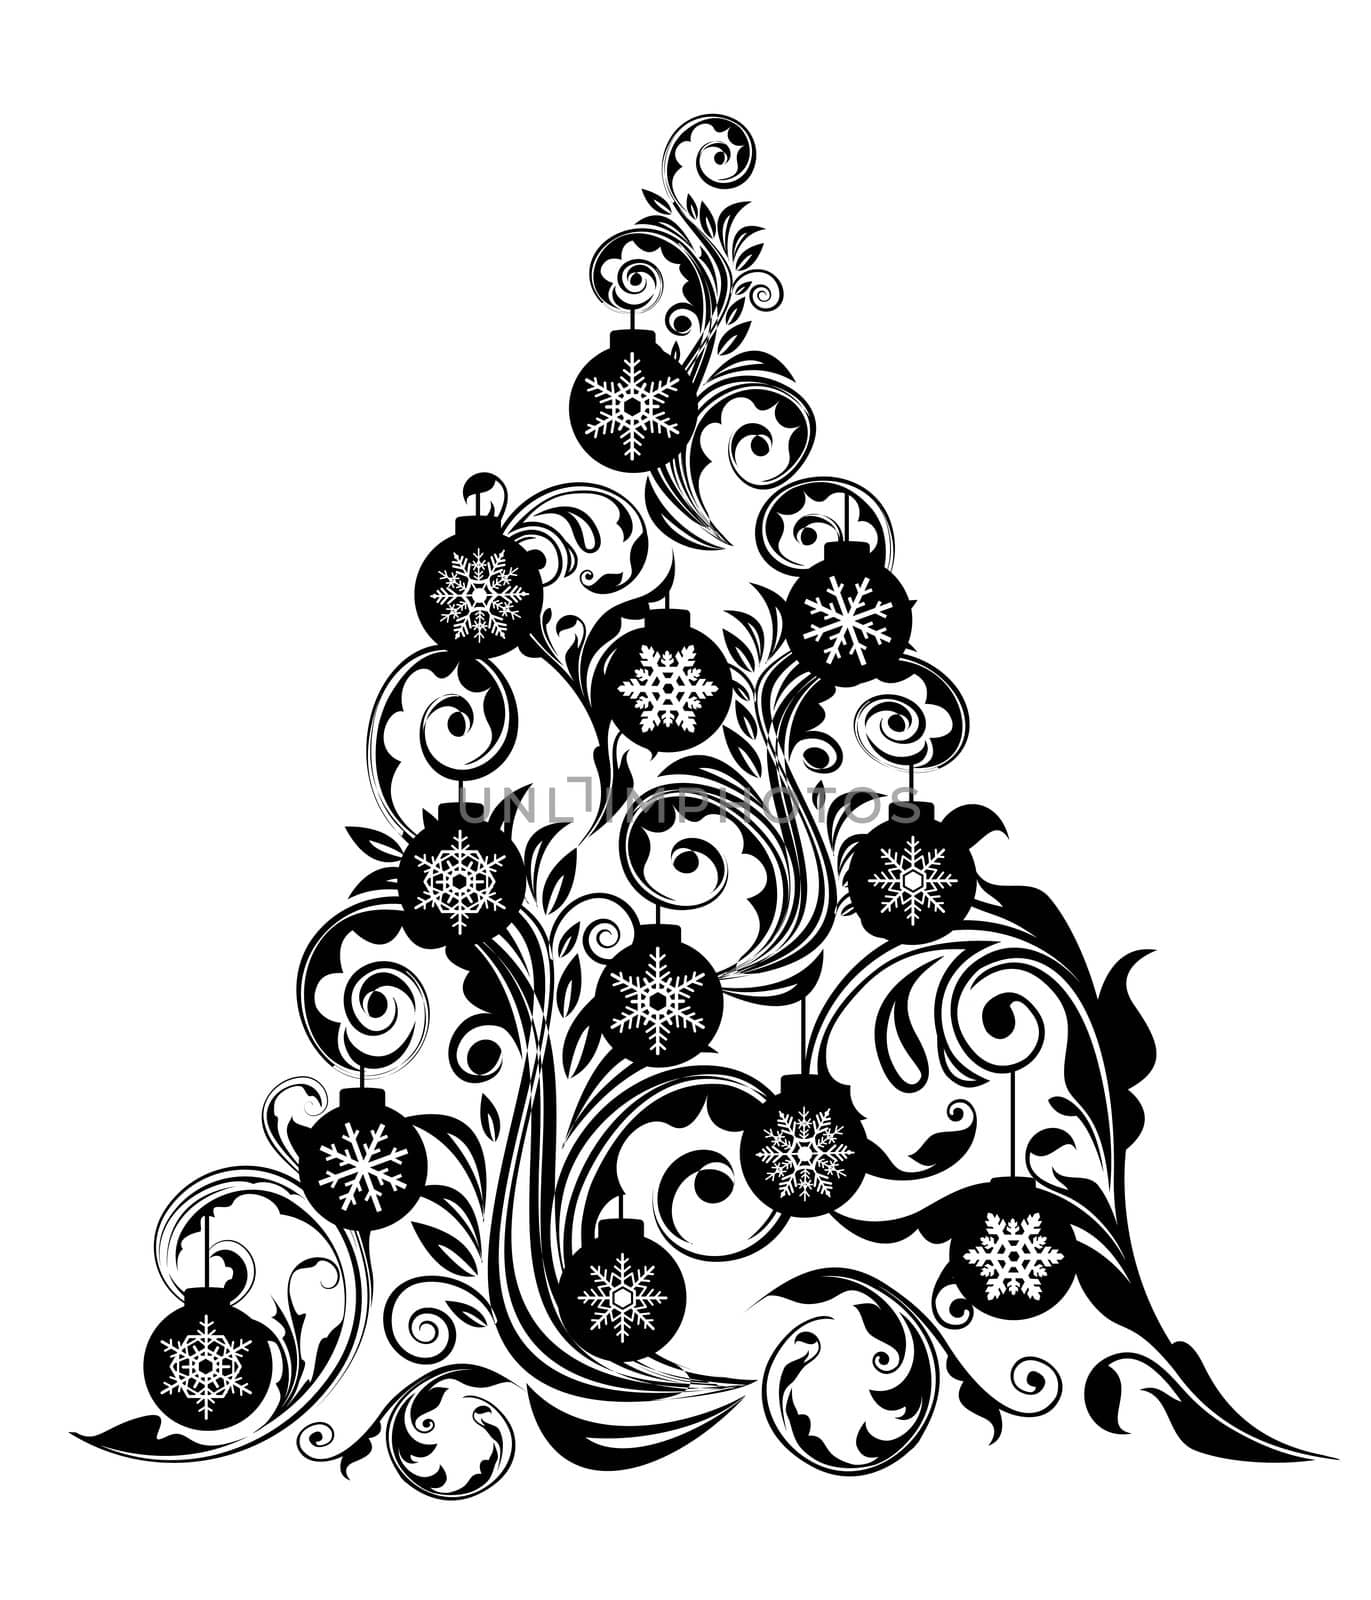 Christmas Tree with Leaf Swirls Design and Ornaments by jpldesigns